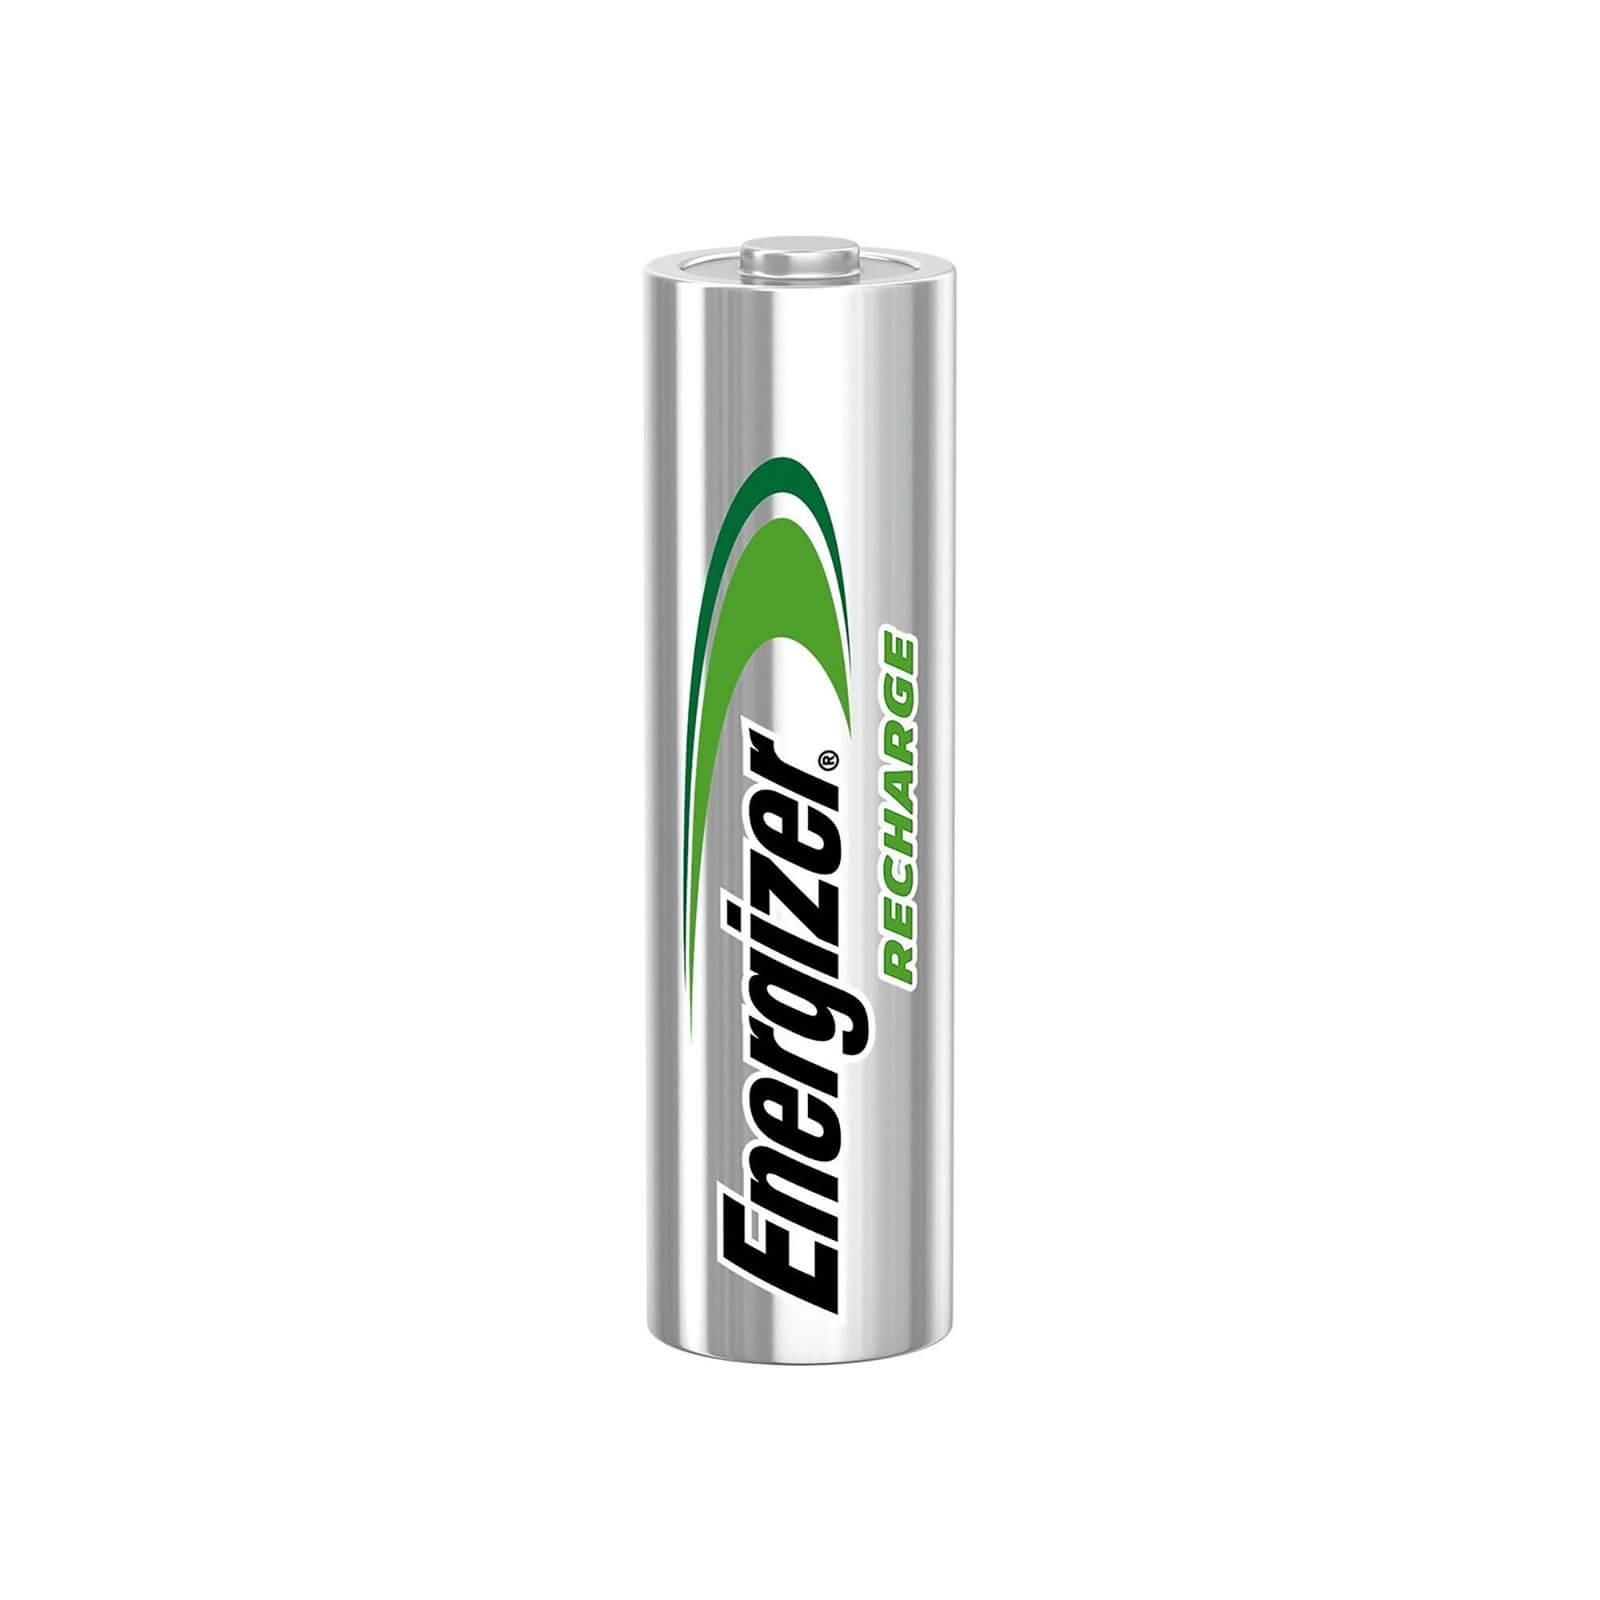 Energizer Universal 1300mAh Rechargeable AA Batteries - 4 Pack